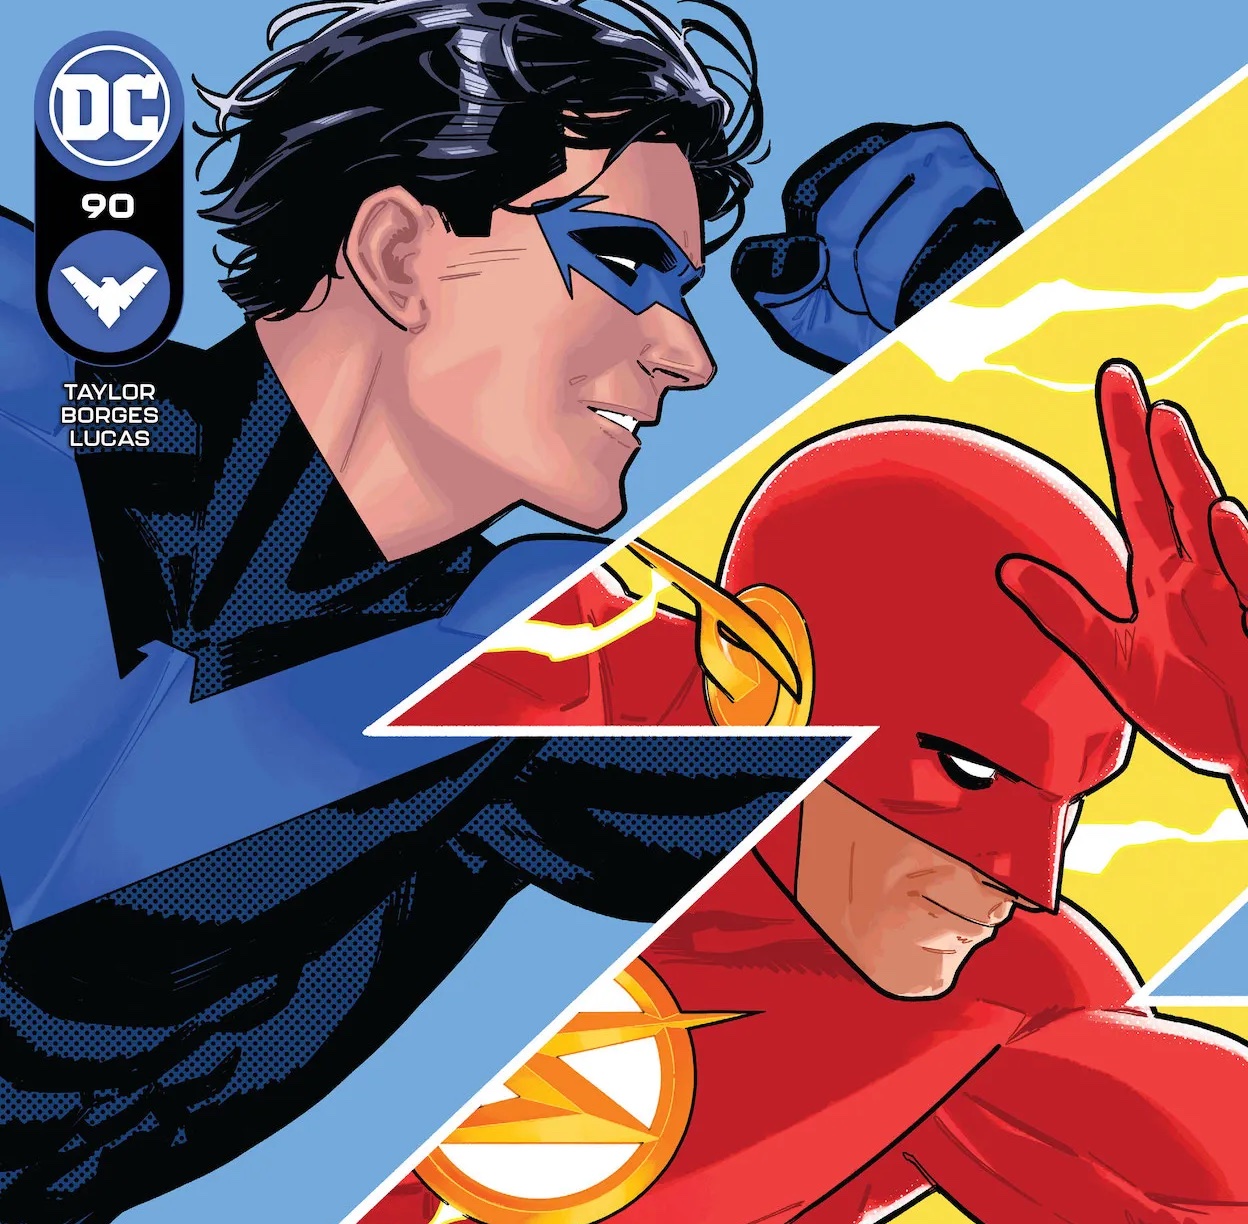 'Nightwing' #90 features The Flash, explosions, and escapes